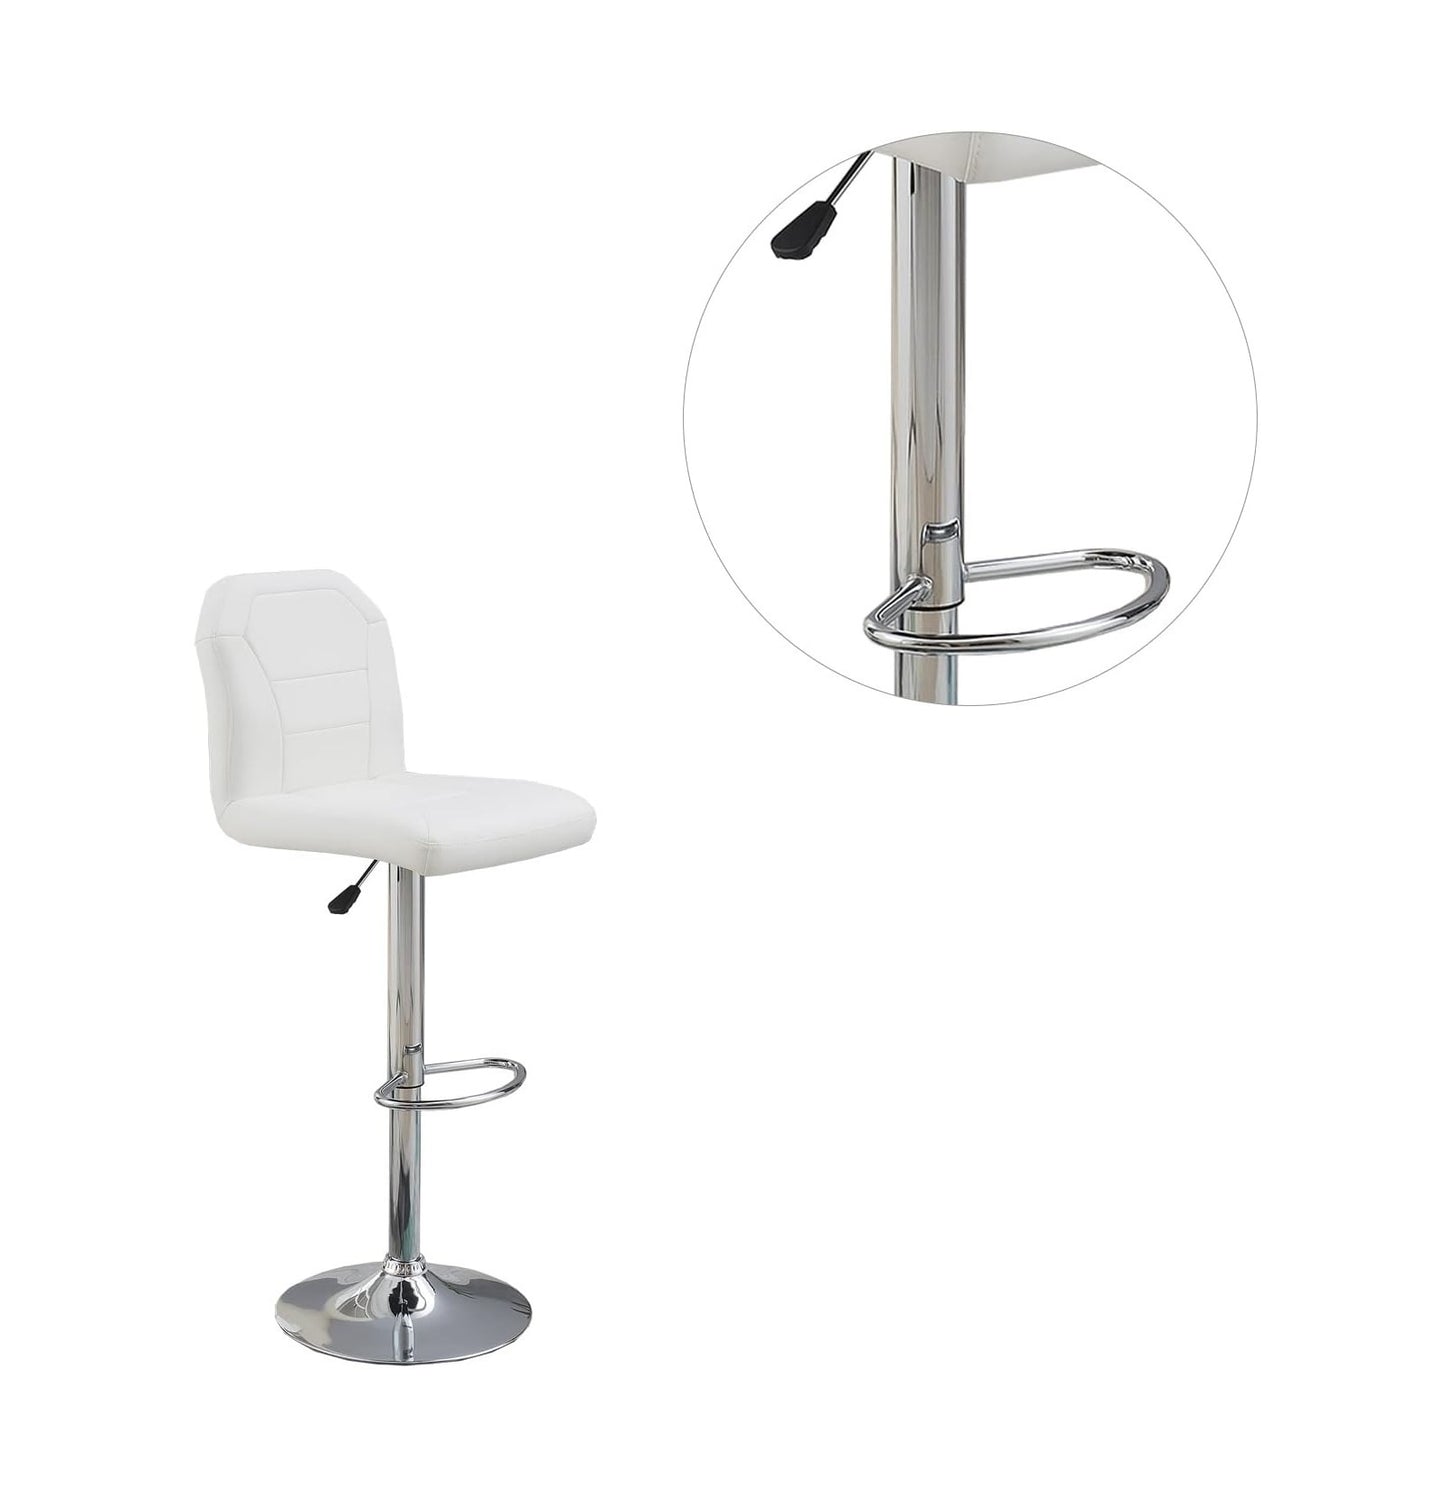 1st Choice Modern White Bar Stools - Adjustable & Chic | Perfect for Any Home